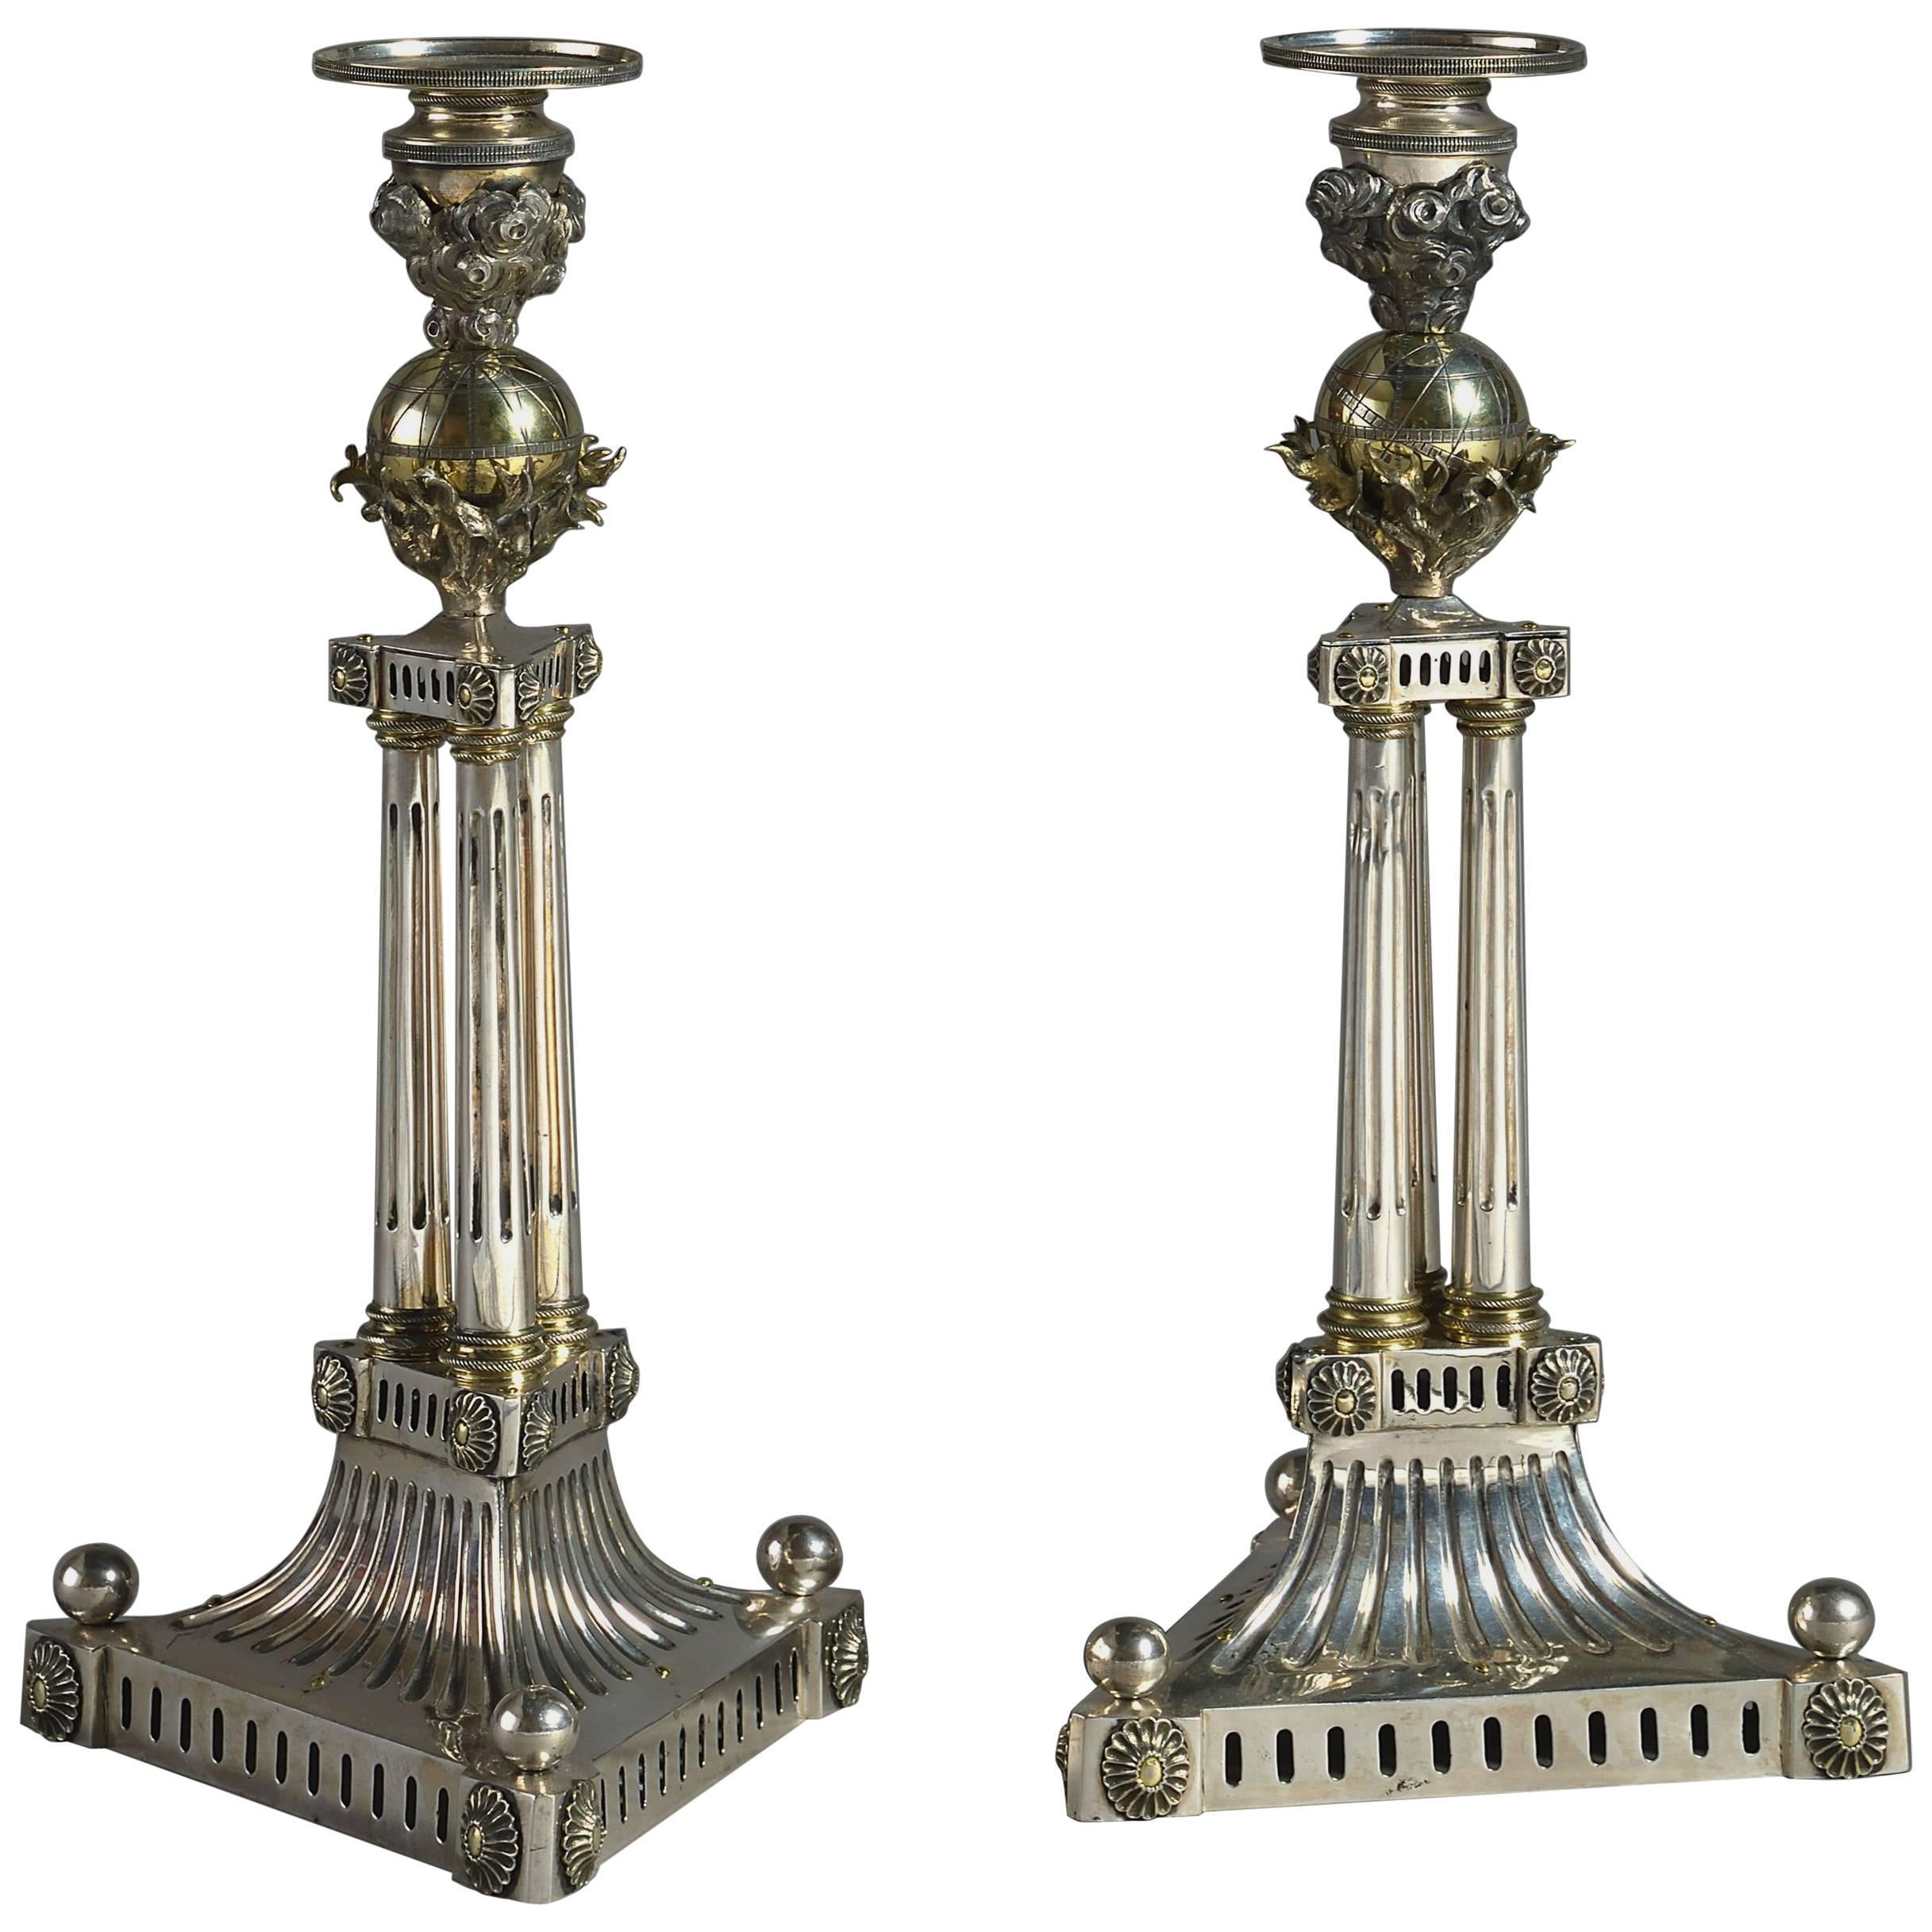 Early 19th Century Pair of Silver Plate and Ormolu Candlesticks